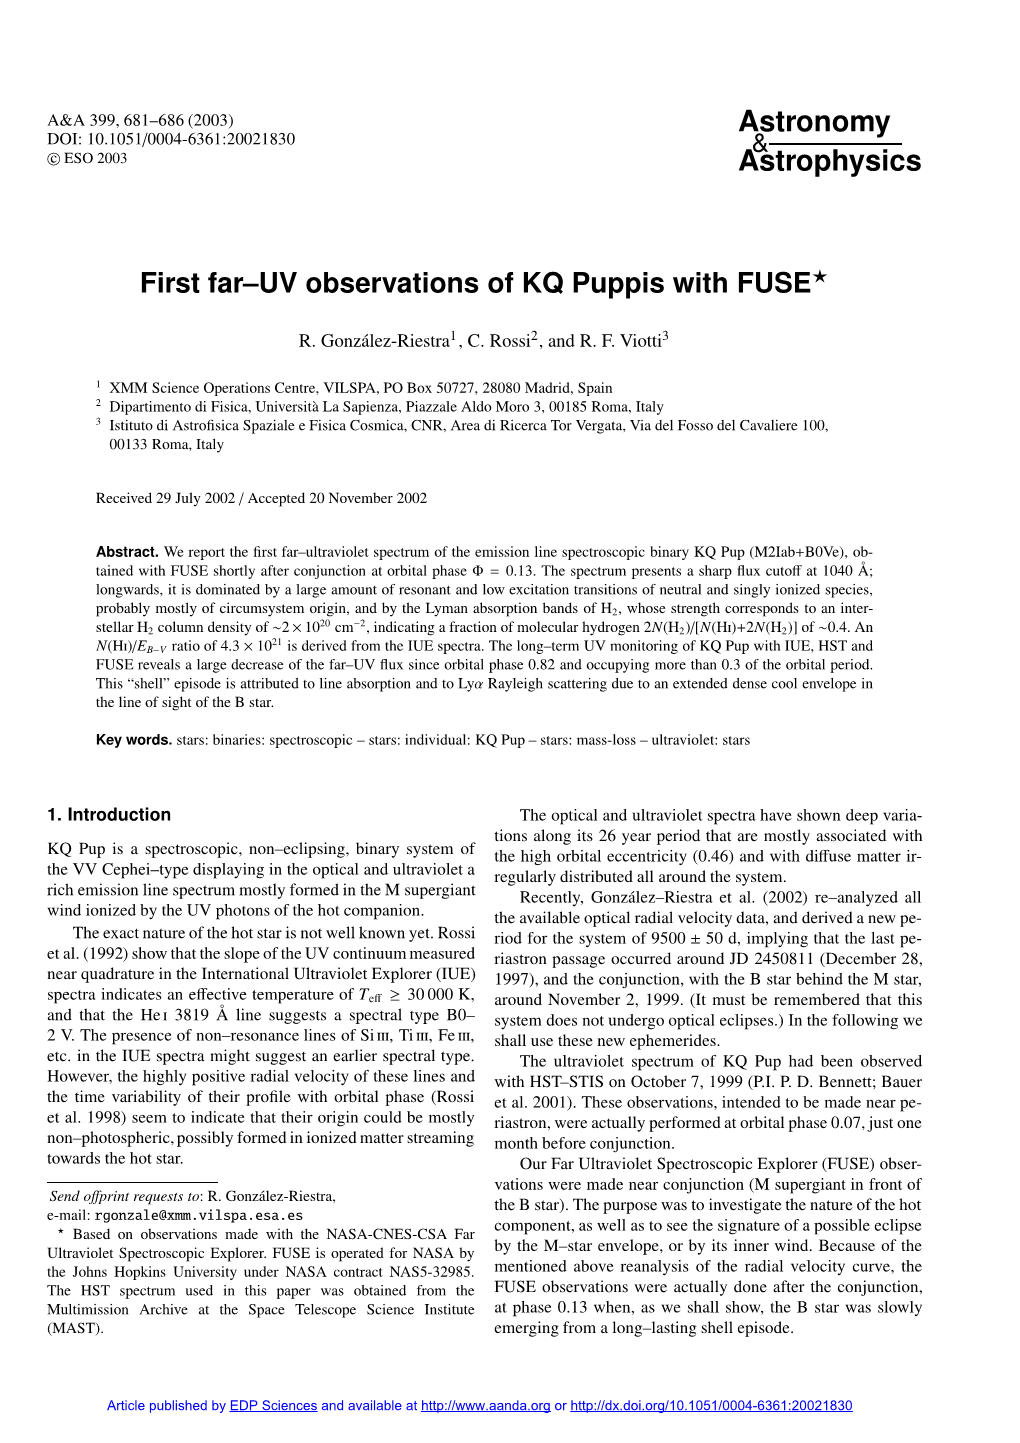 First Far–UV Observations of KQ Puppis with FUSE?